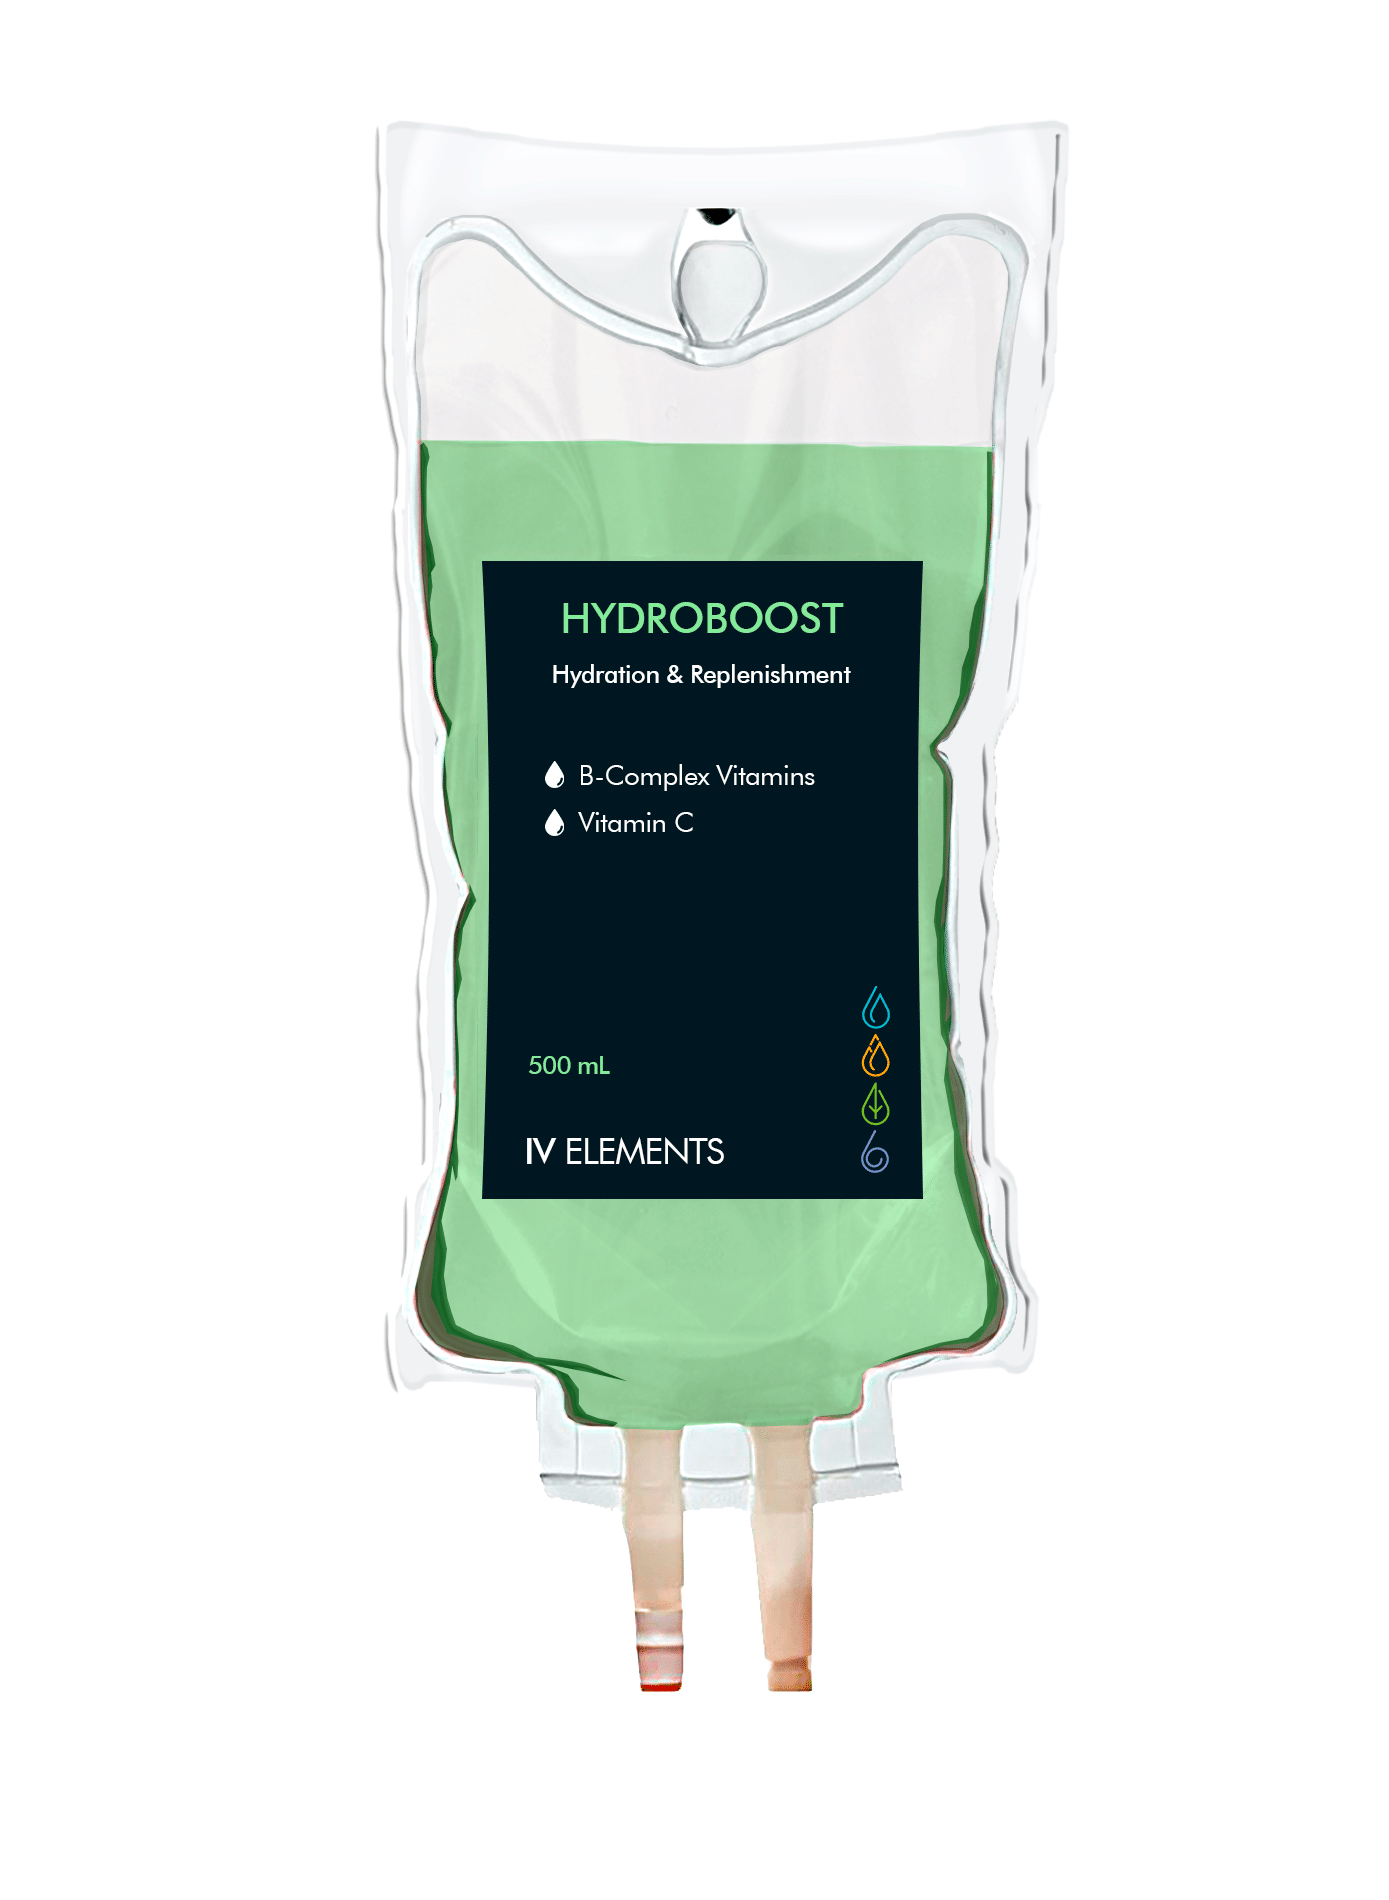 Hydroboost IV drip bag from IV Elements: Hydration & replenishment